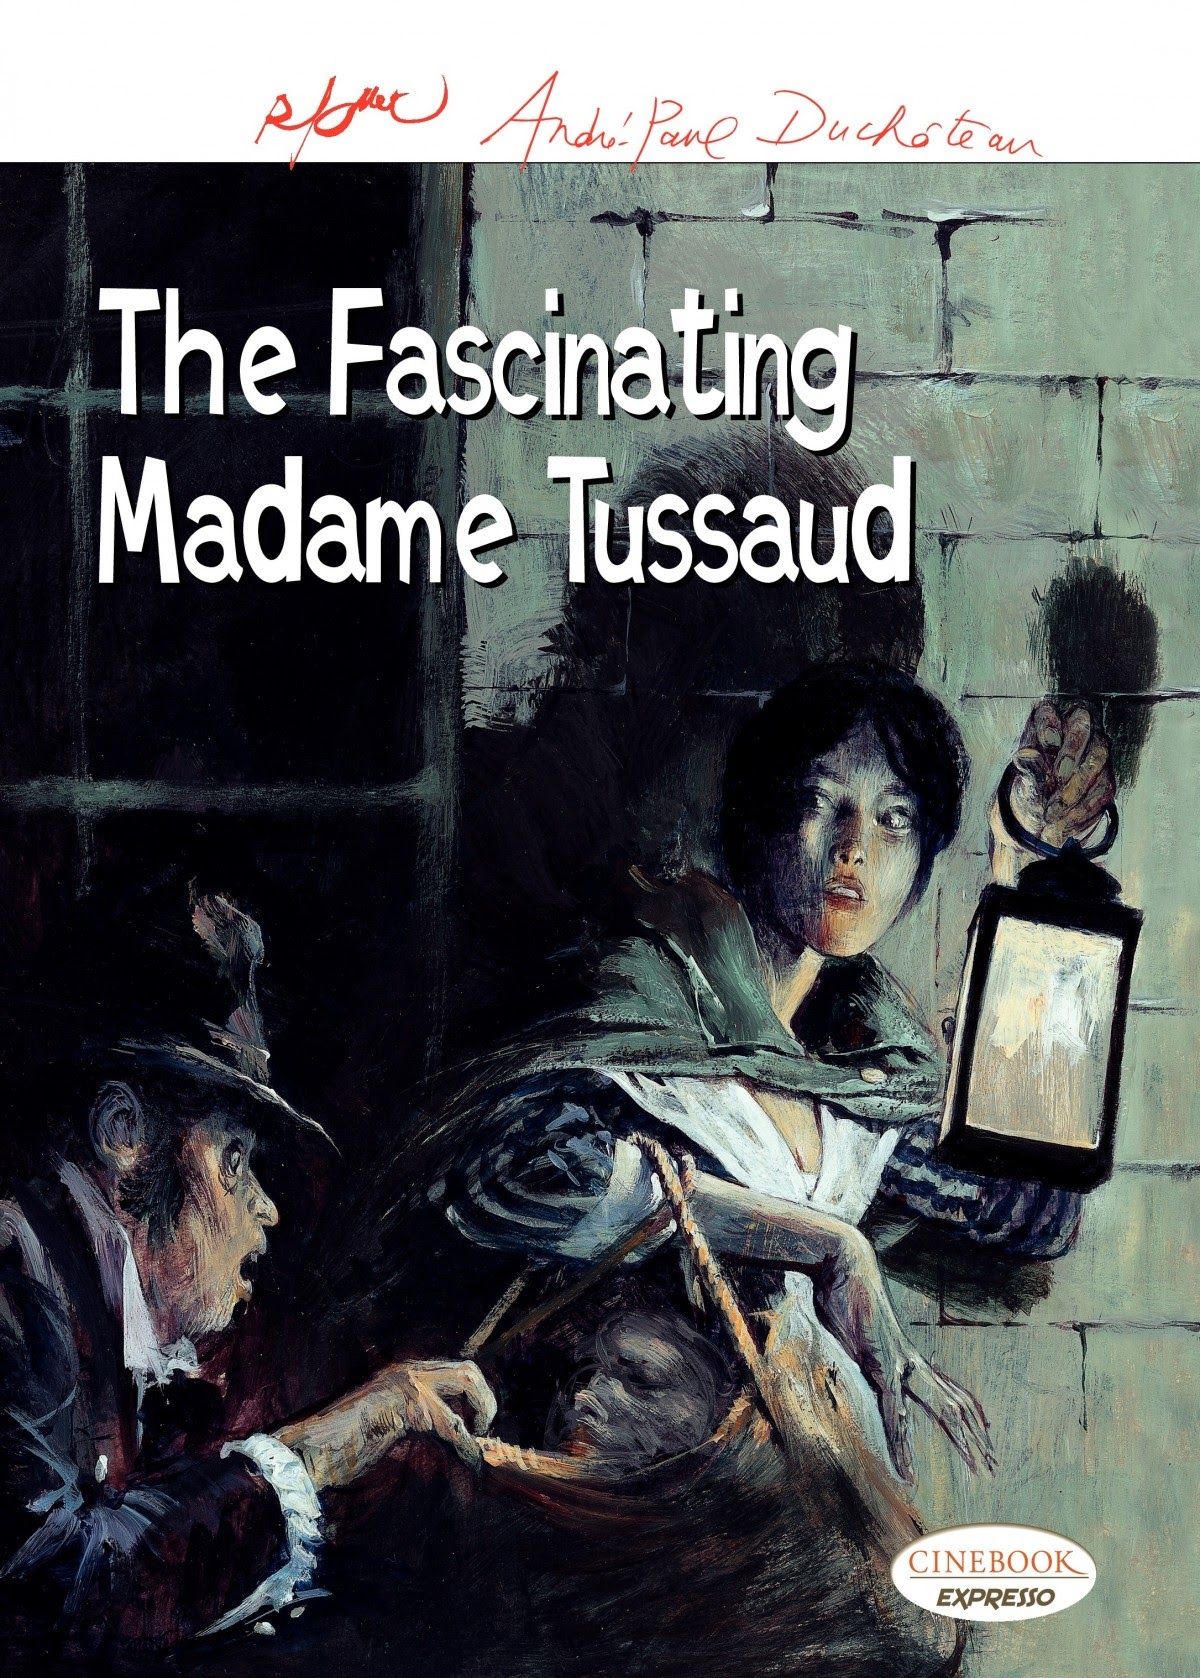 Read online The Fascinating Madame Tussaud comic -  Issue # TPB - 1